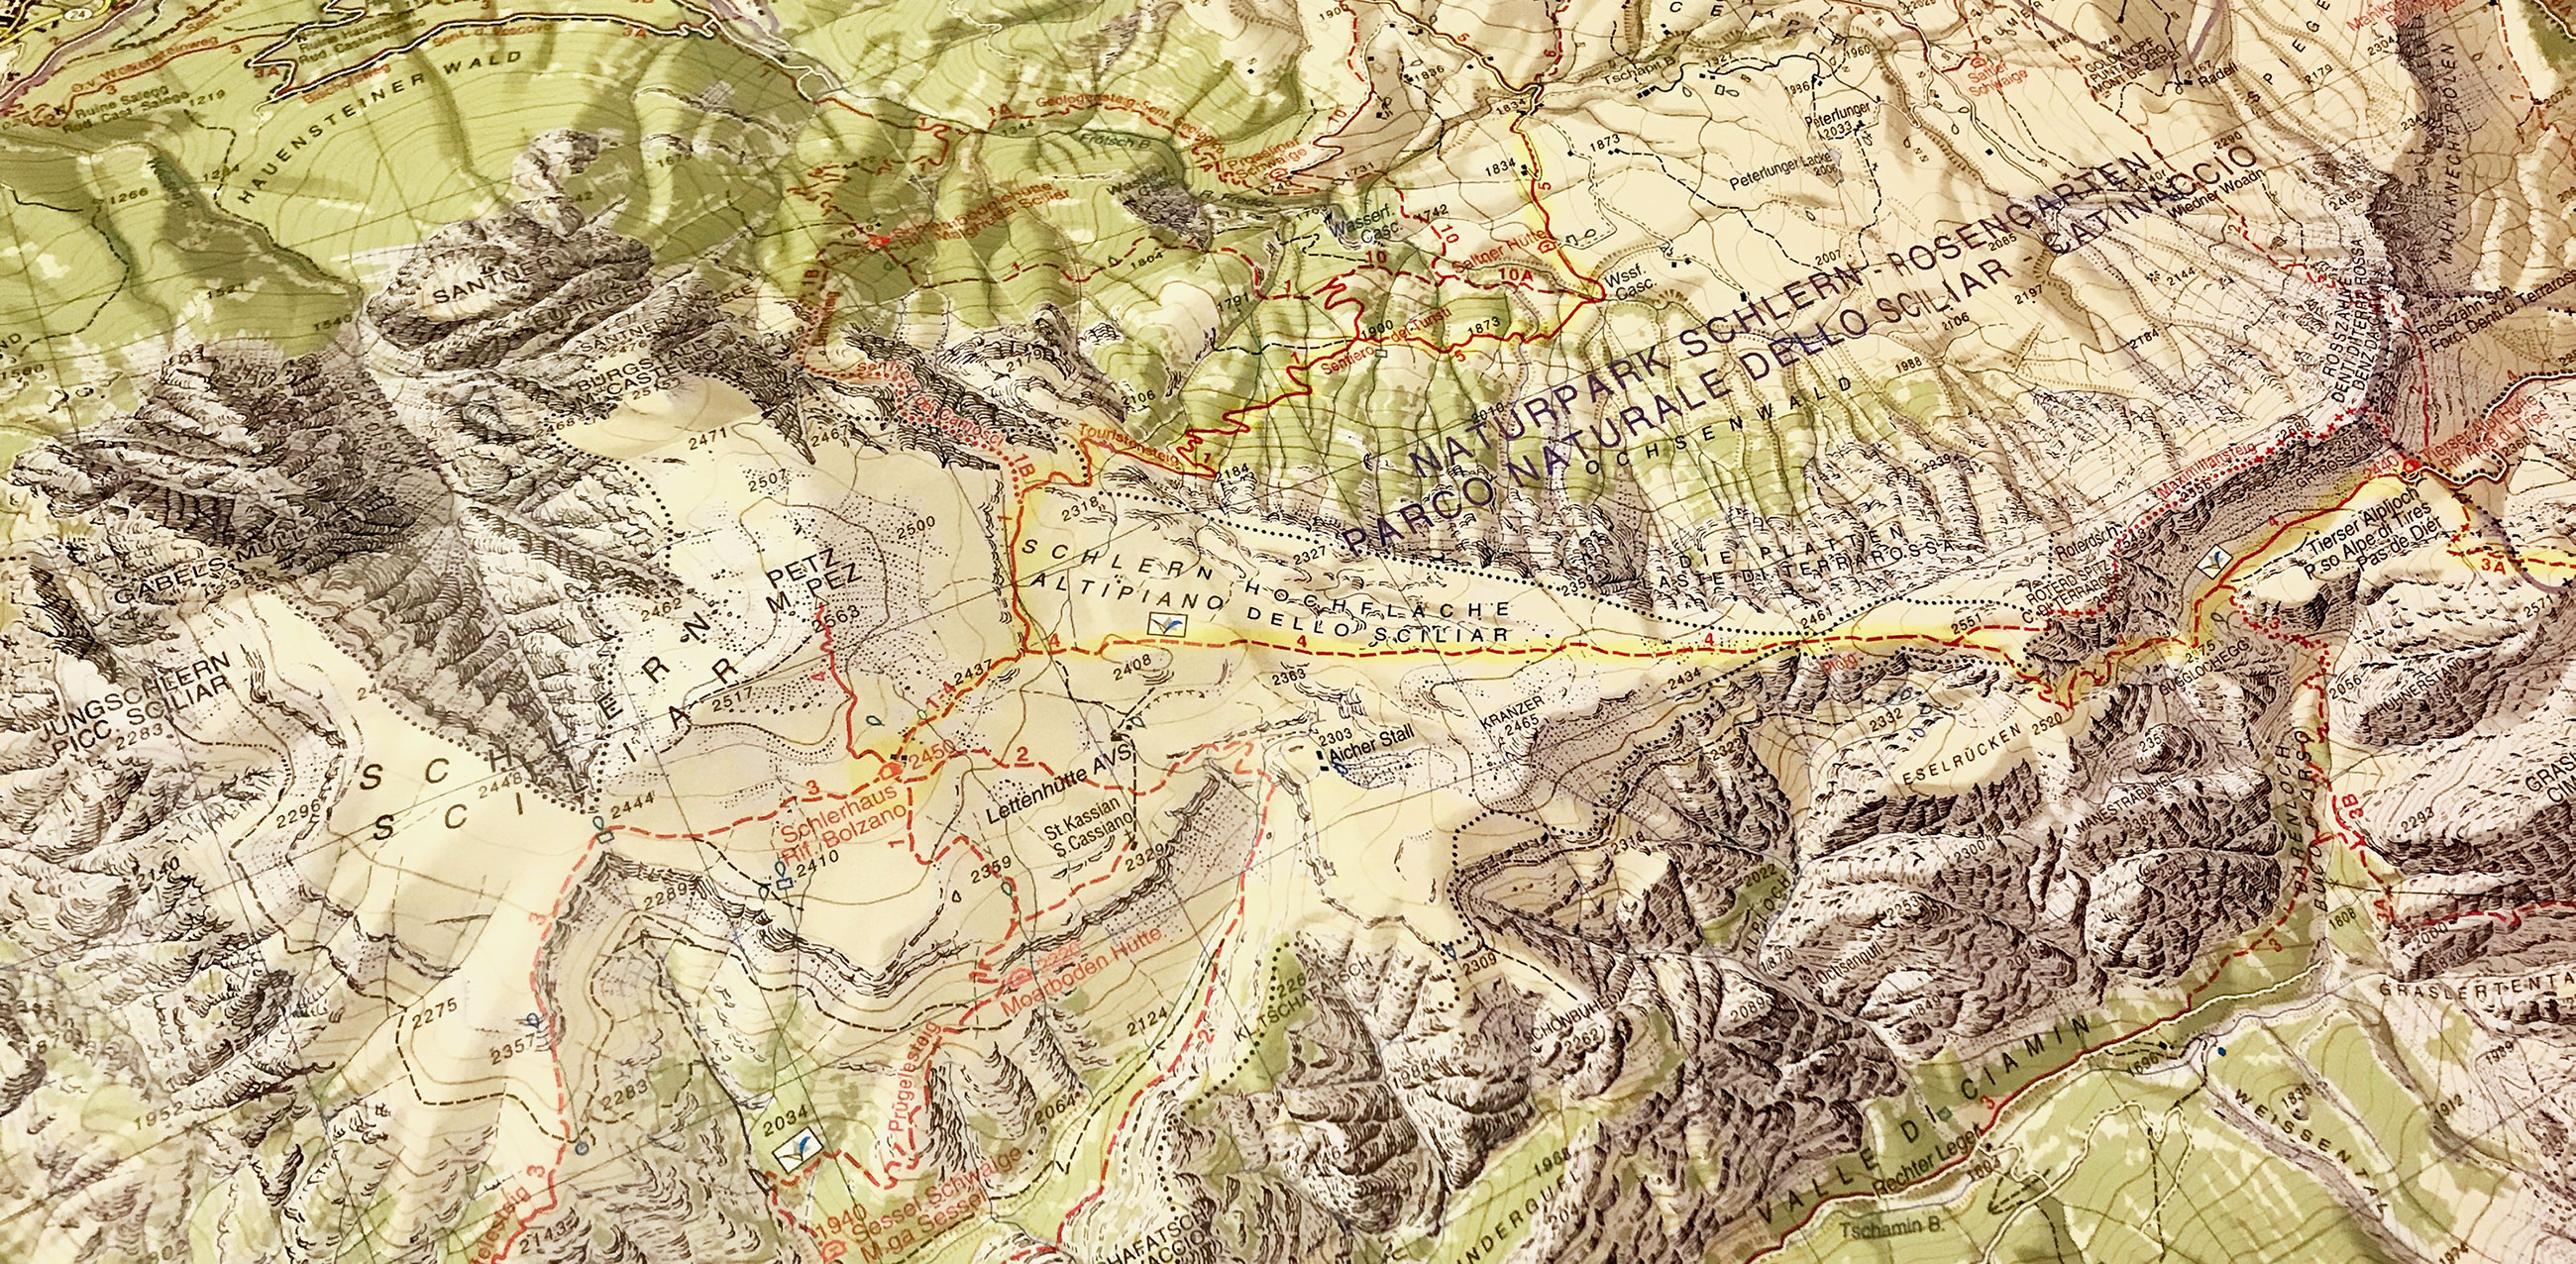 Hiking map of the Dolomites